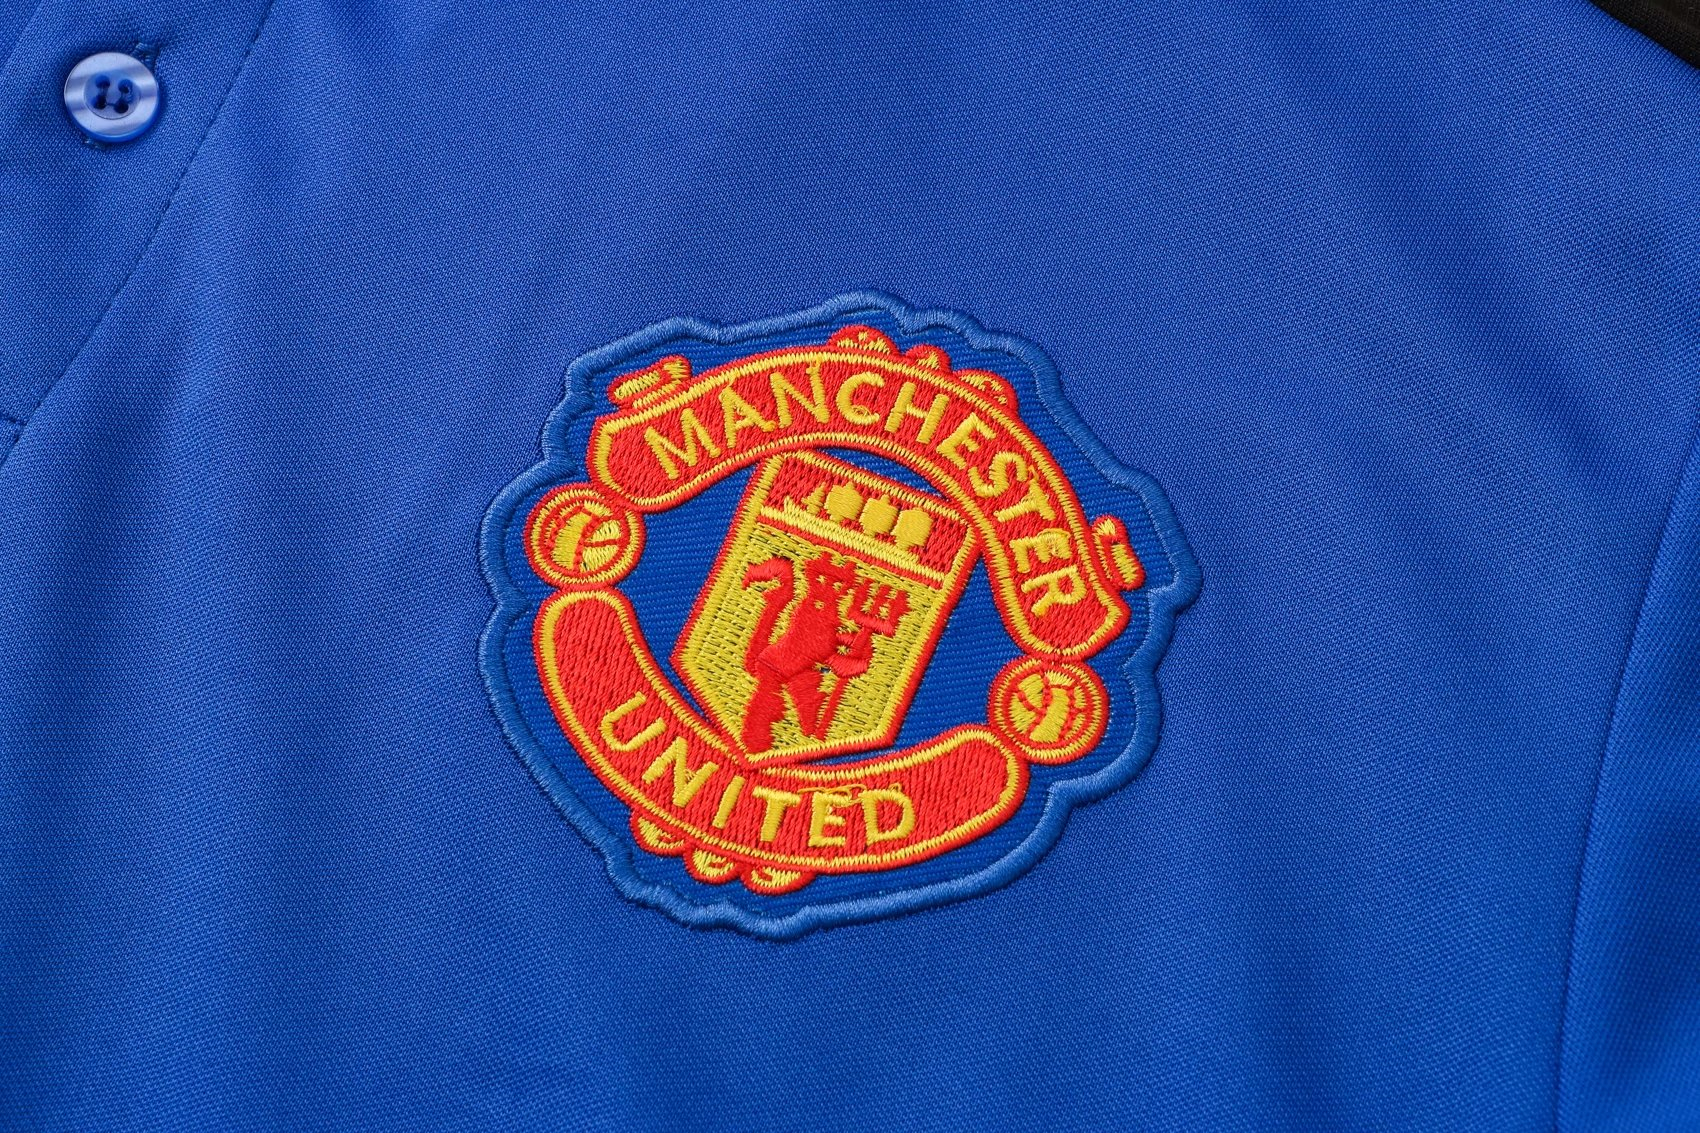 Manchester United Soccer Polo Jersey Blue Mens 2021/22